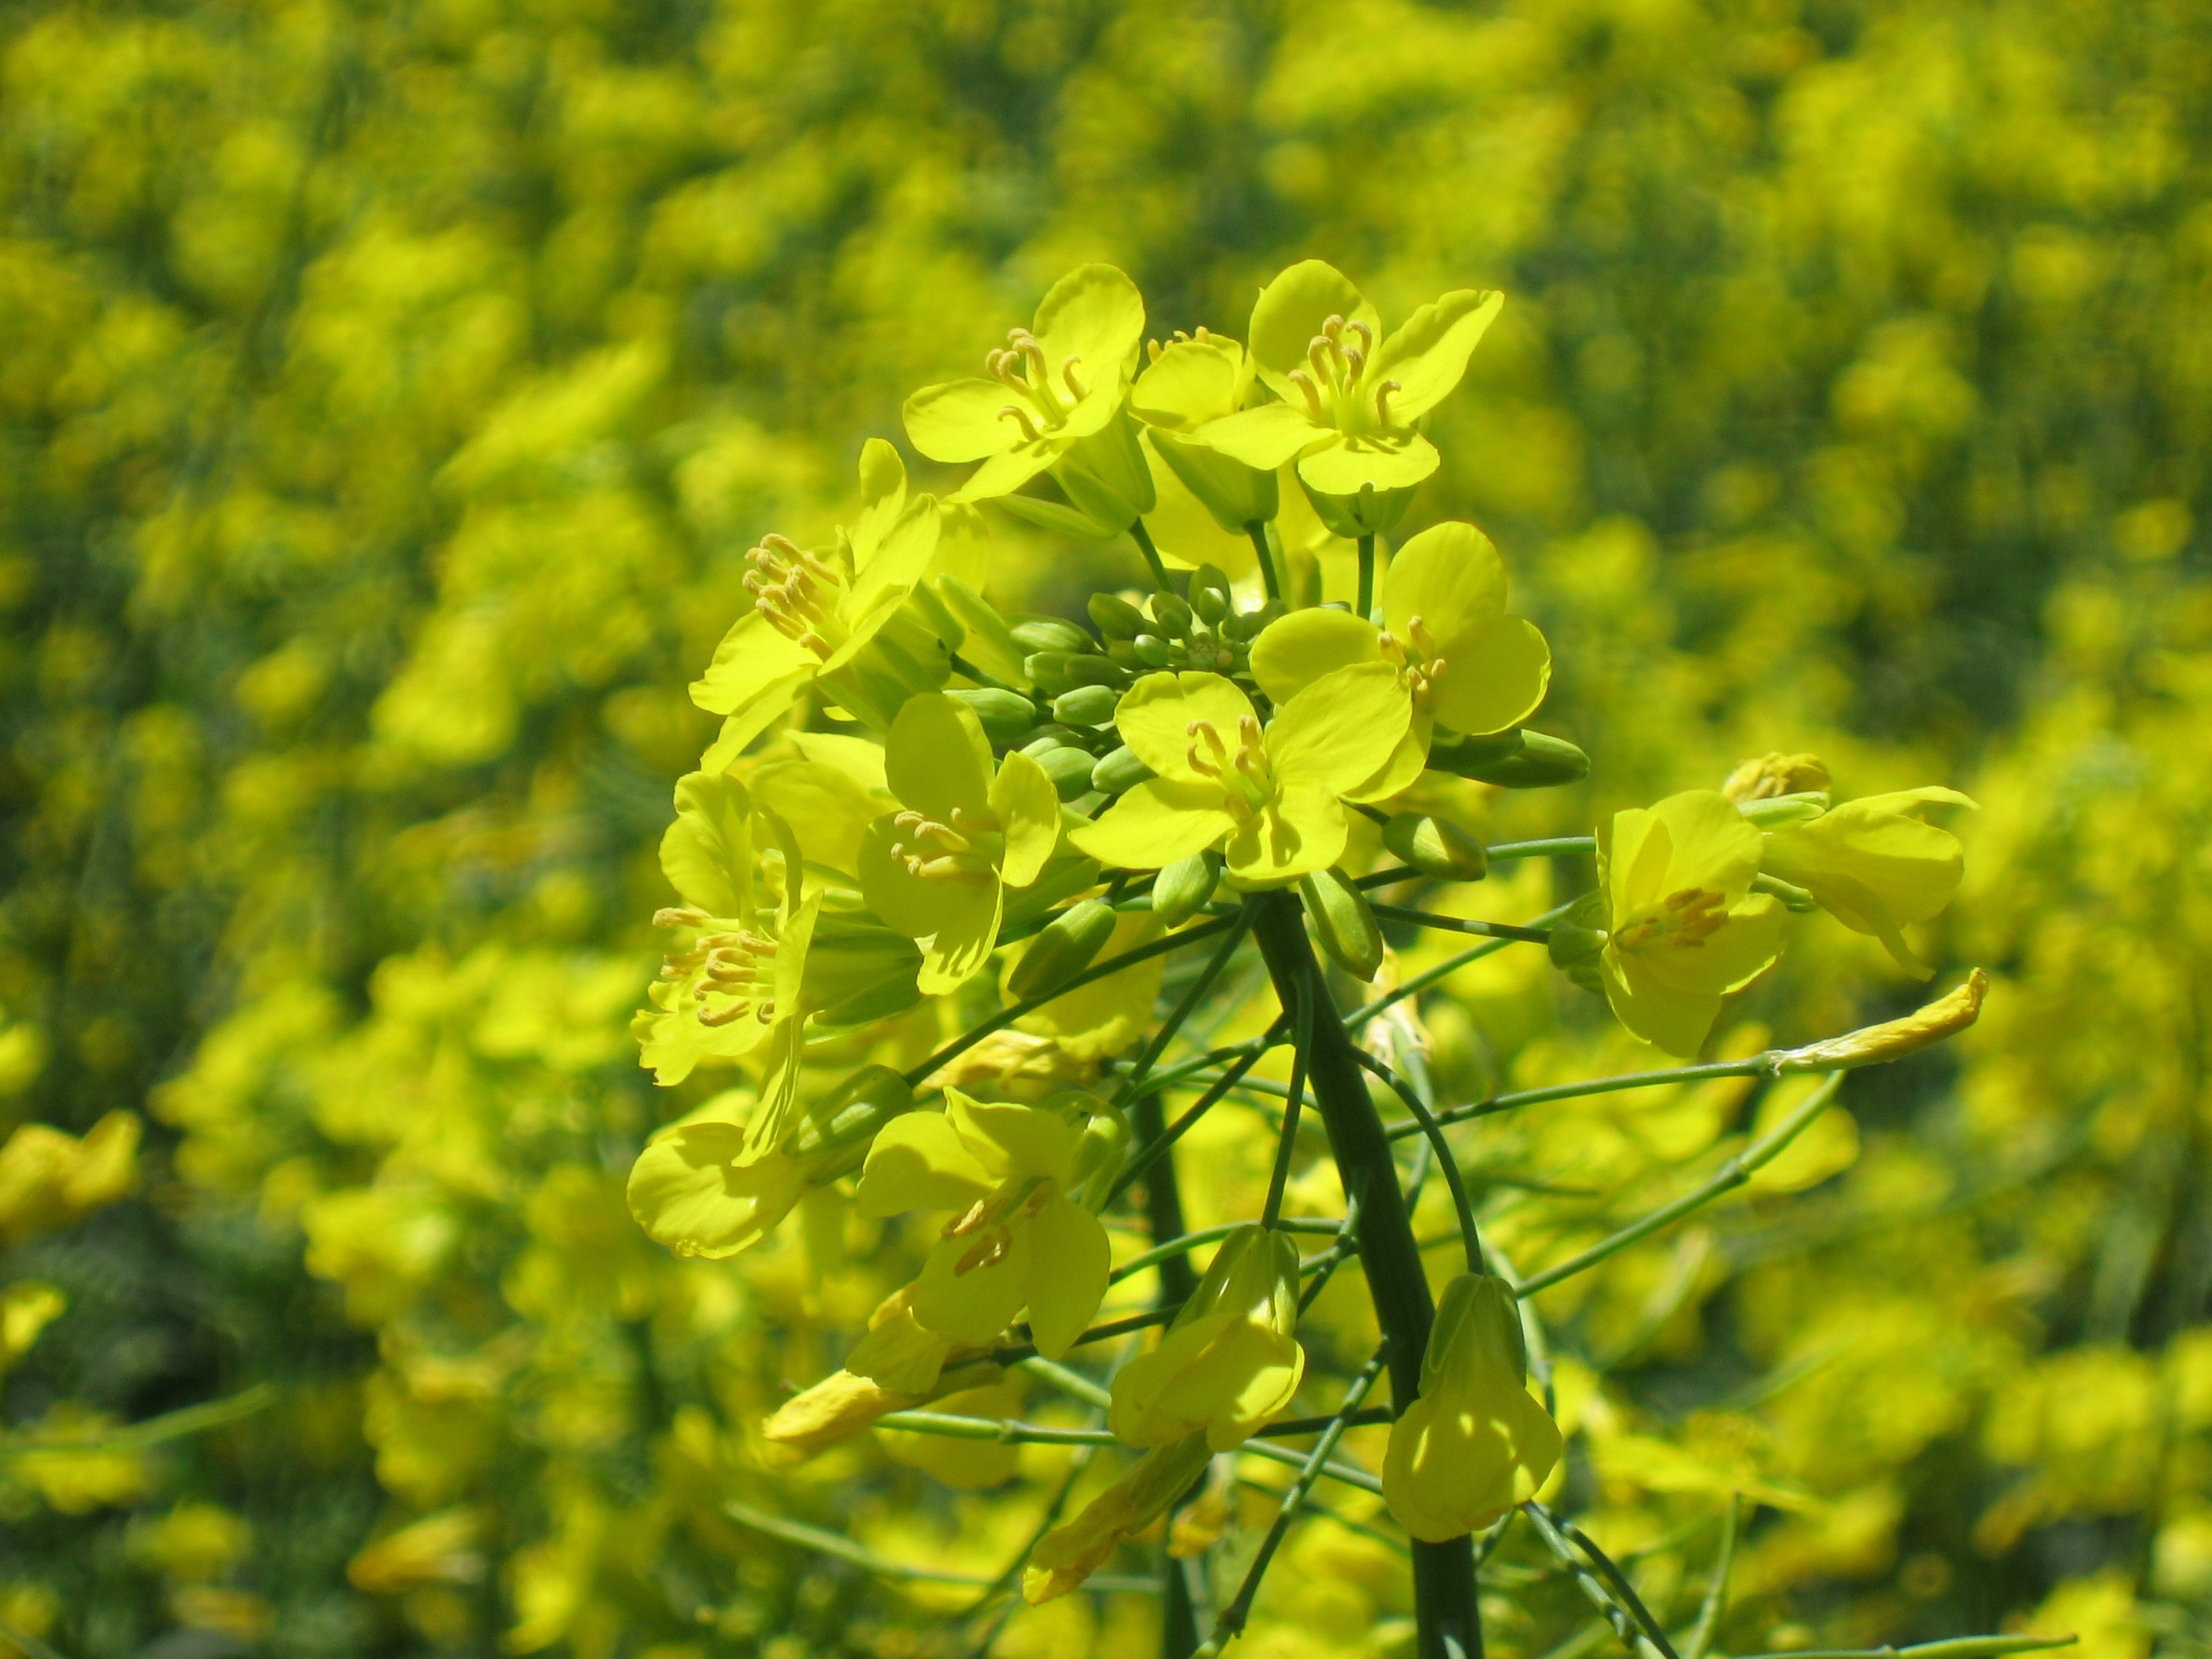 Canola TV- Tom Peeper on Lessons Learned in Early Years of Canola Production in Southern Plains